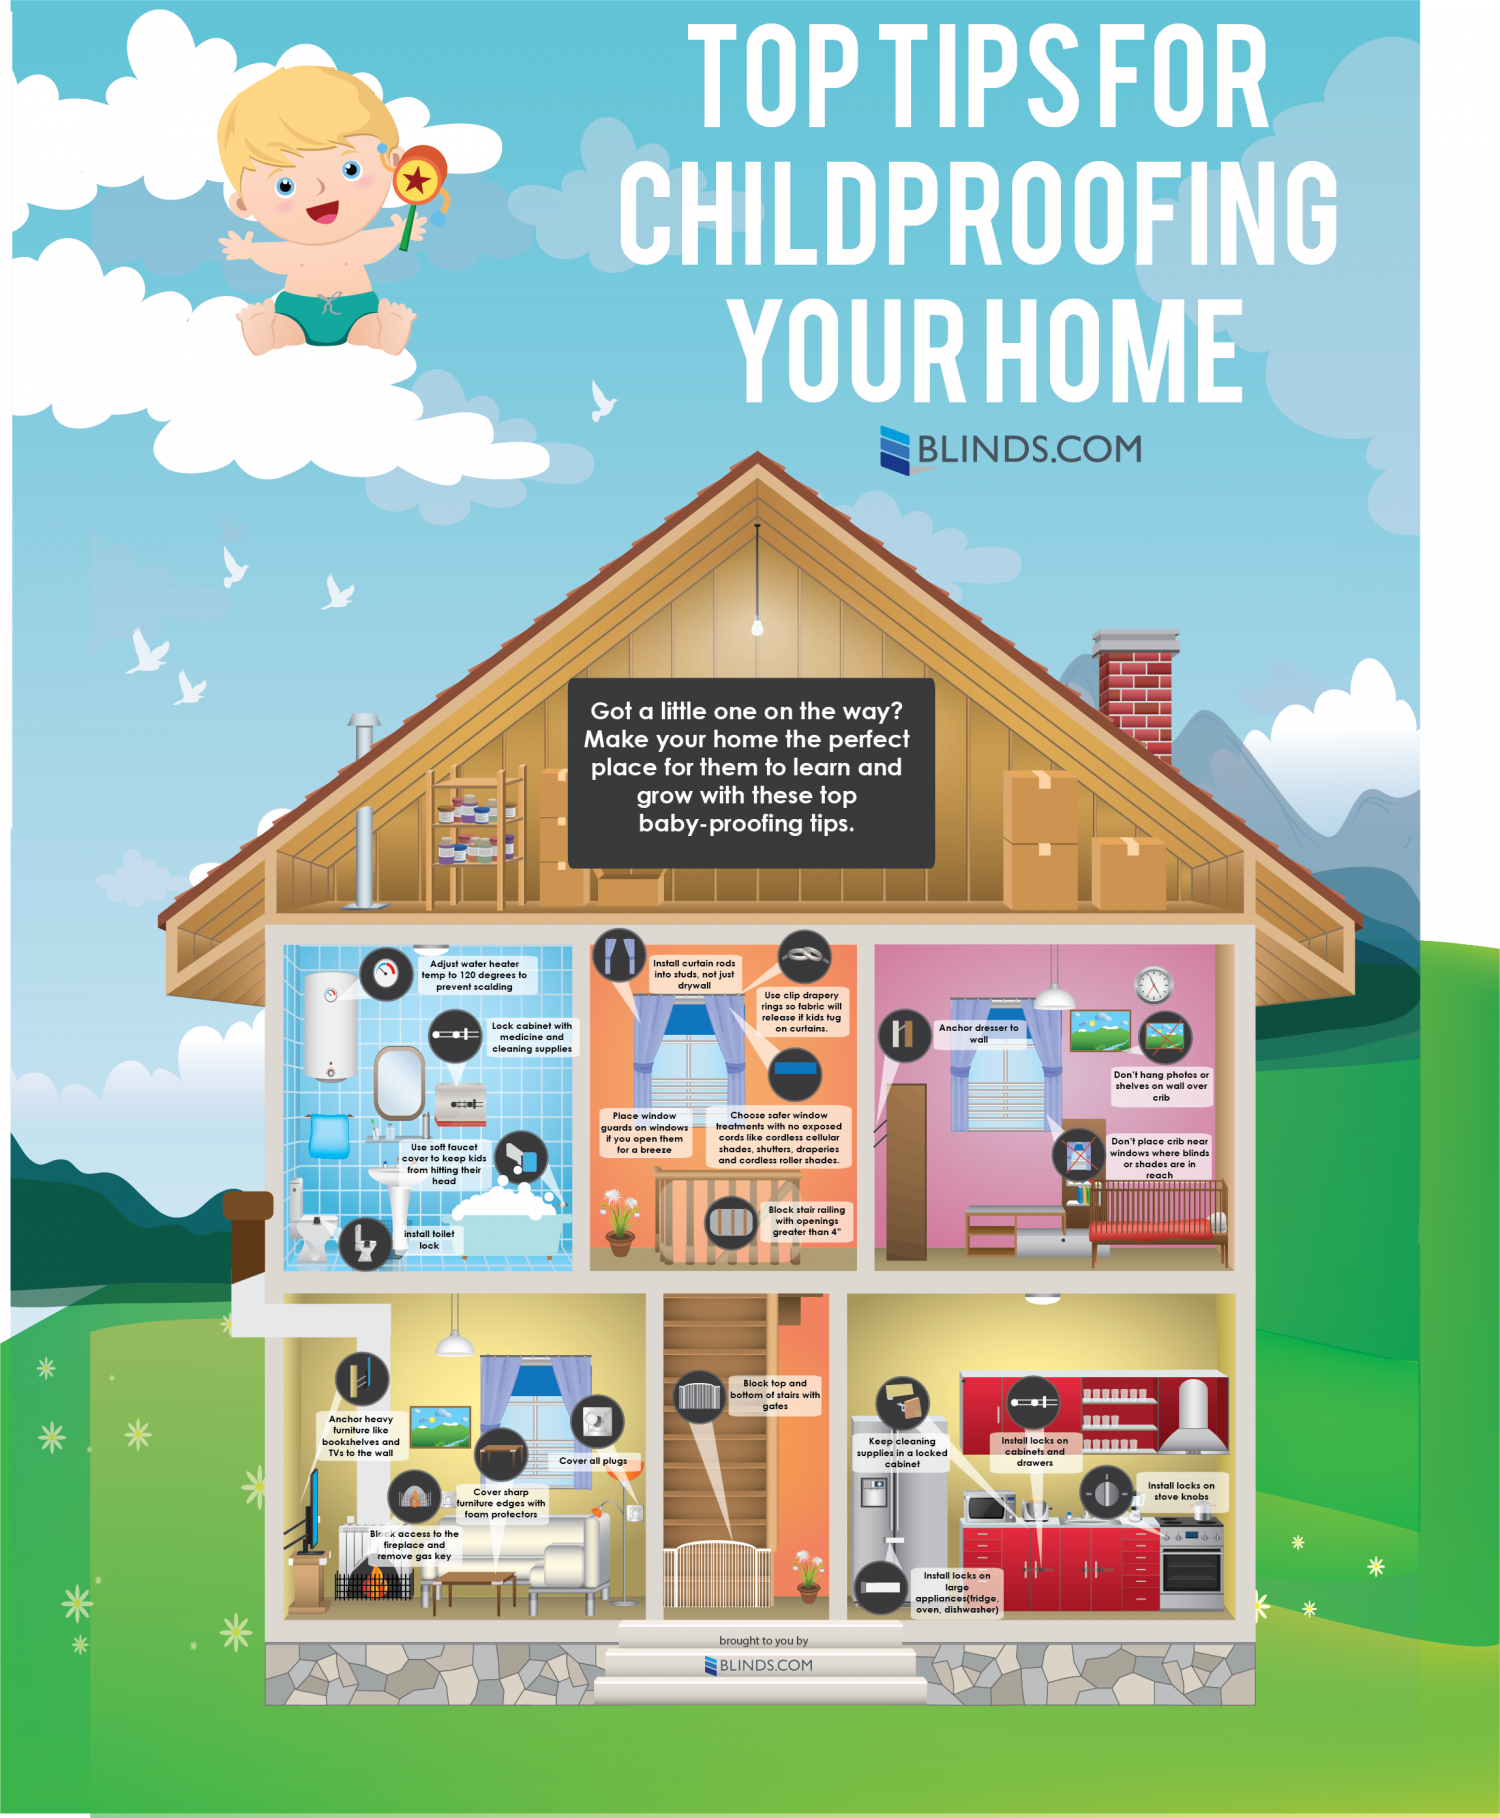 Top Tips for Childproofing Your Home Infographic